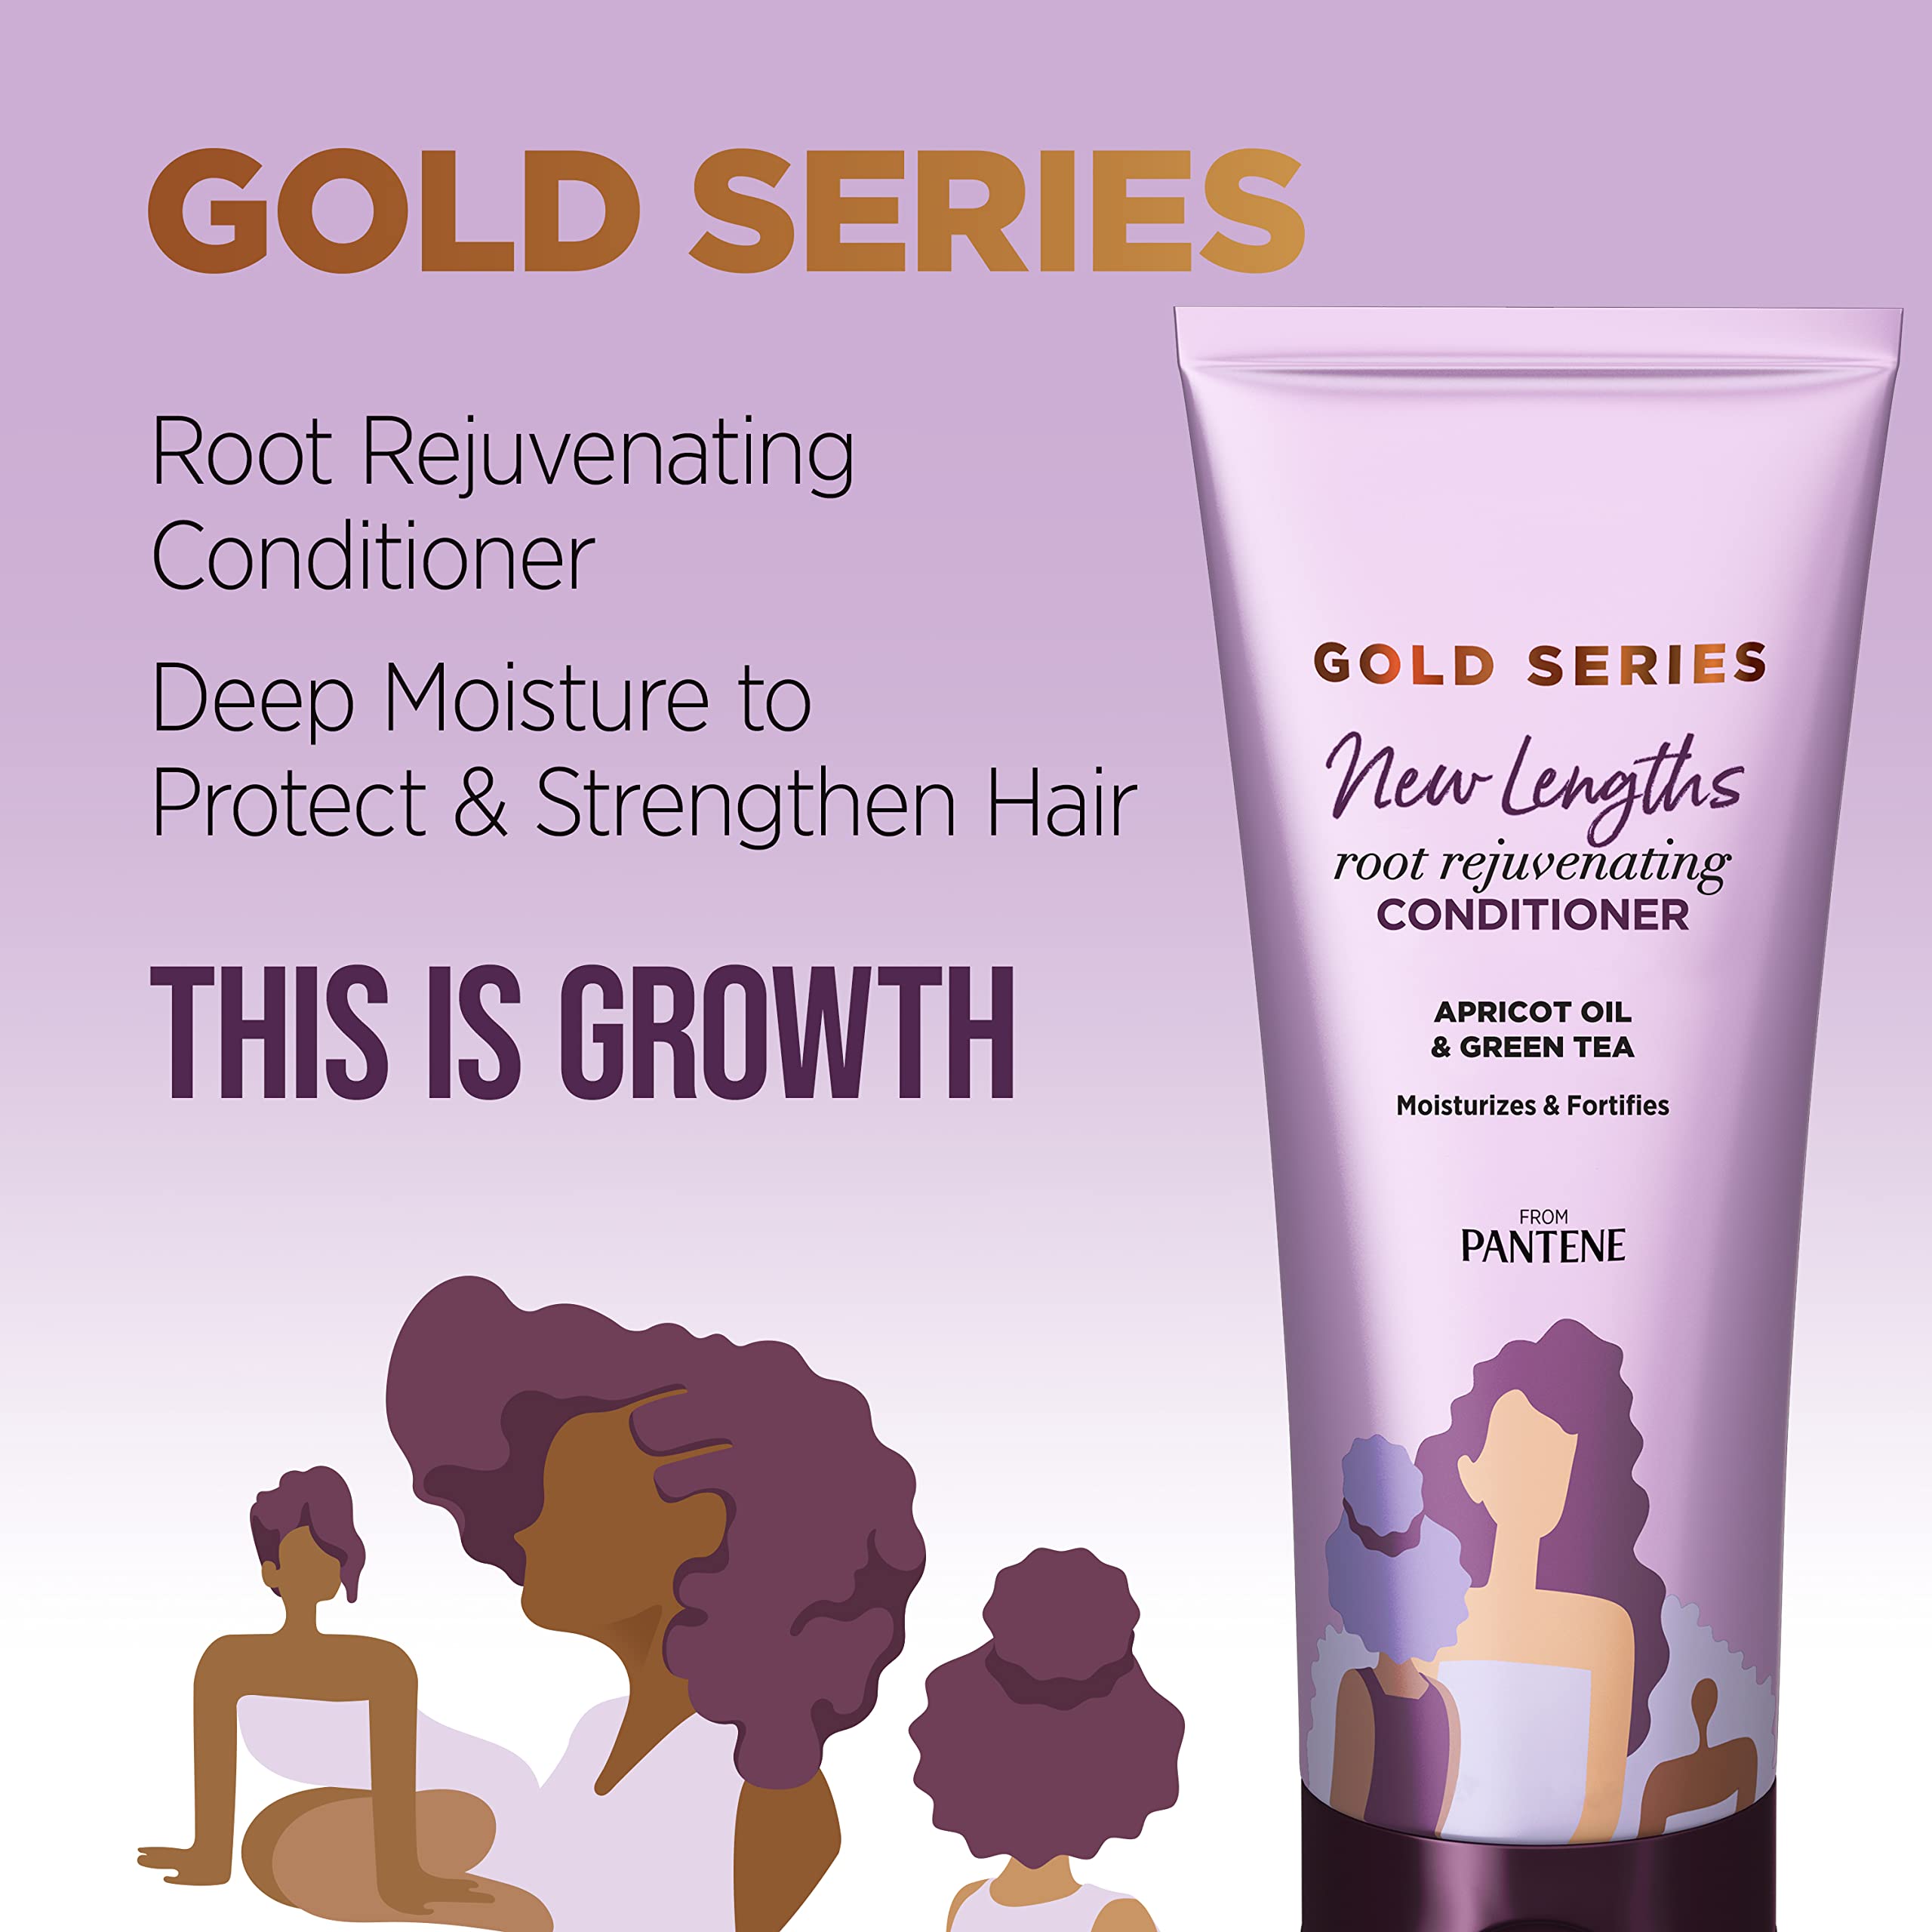 Pantene Gold Series Root Rejuvenating Conditioner with Apricot Oil & Green Tea, Moisturizes & Fortifies, for Natural, Textured, Curly, Coily Hair, Sulfate Free, 11.1 Fl Oz